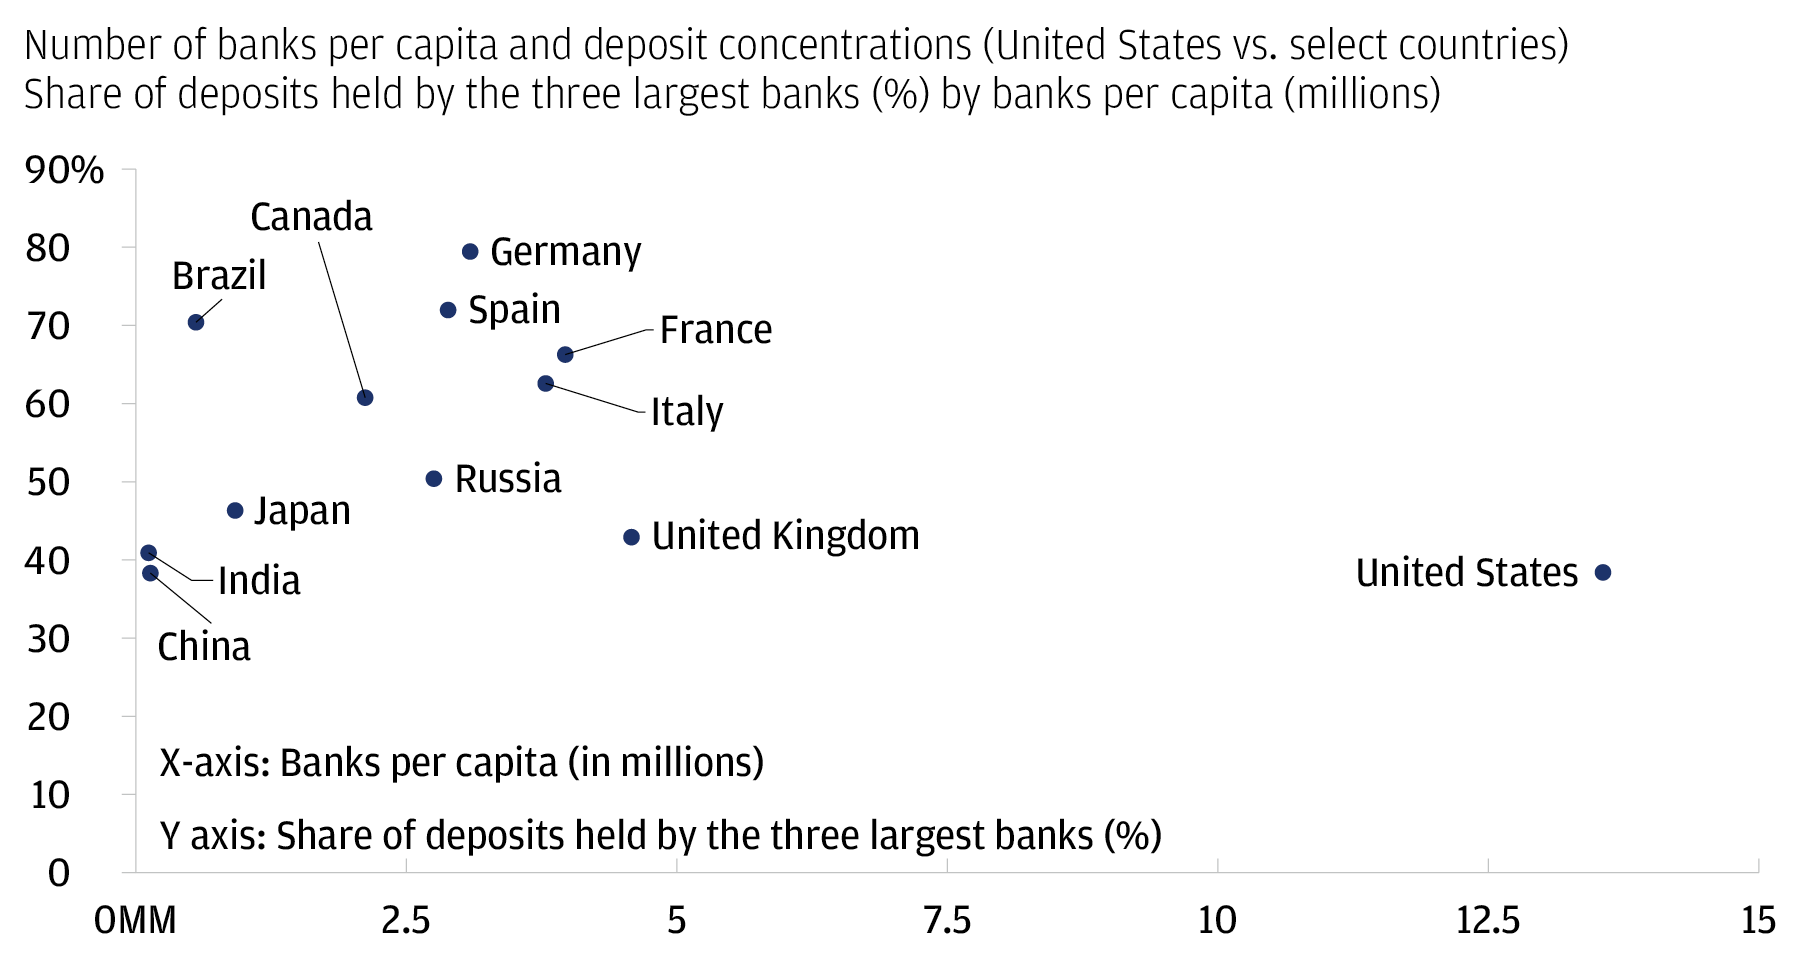 The chart describes bank system concentration measured by two approaches: % share of deposits held by the 3 largest banks, and banks per capita (million).